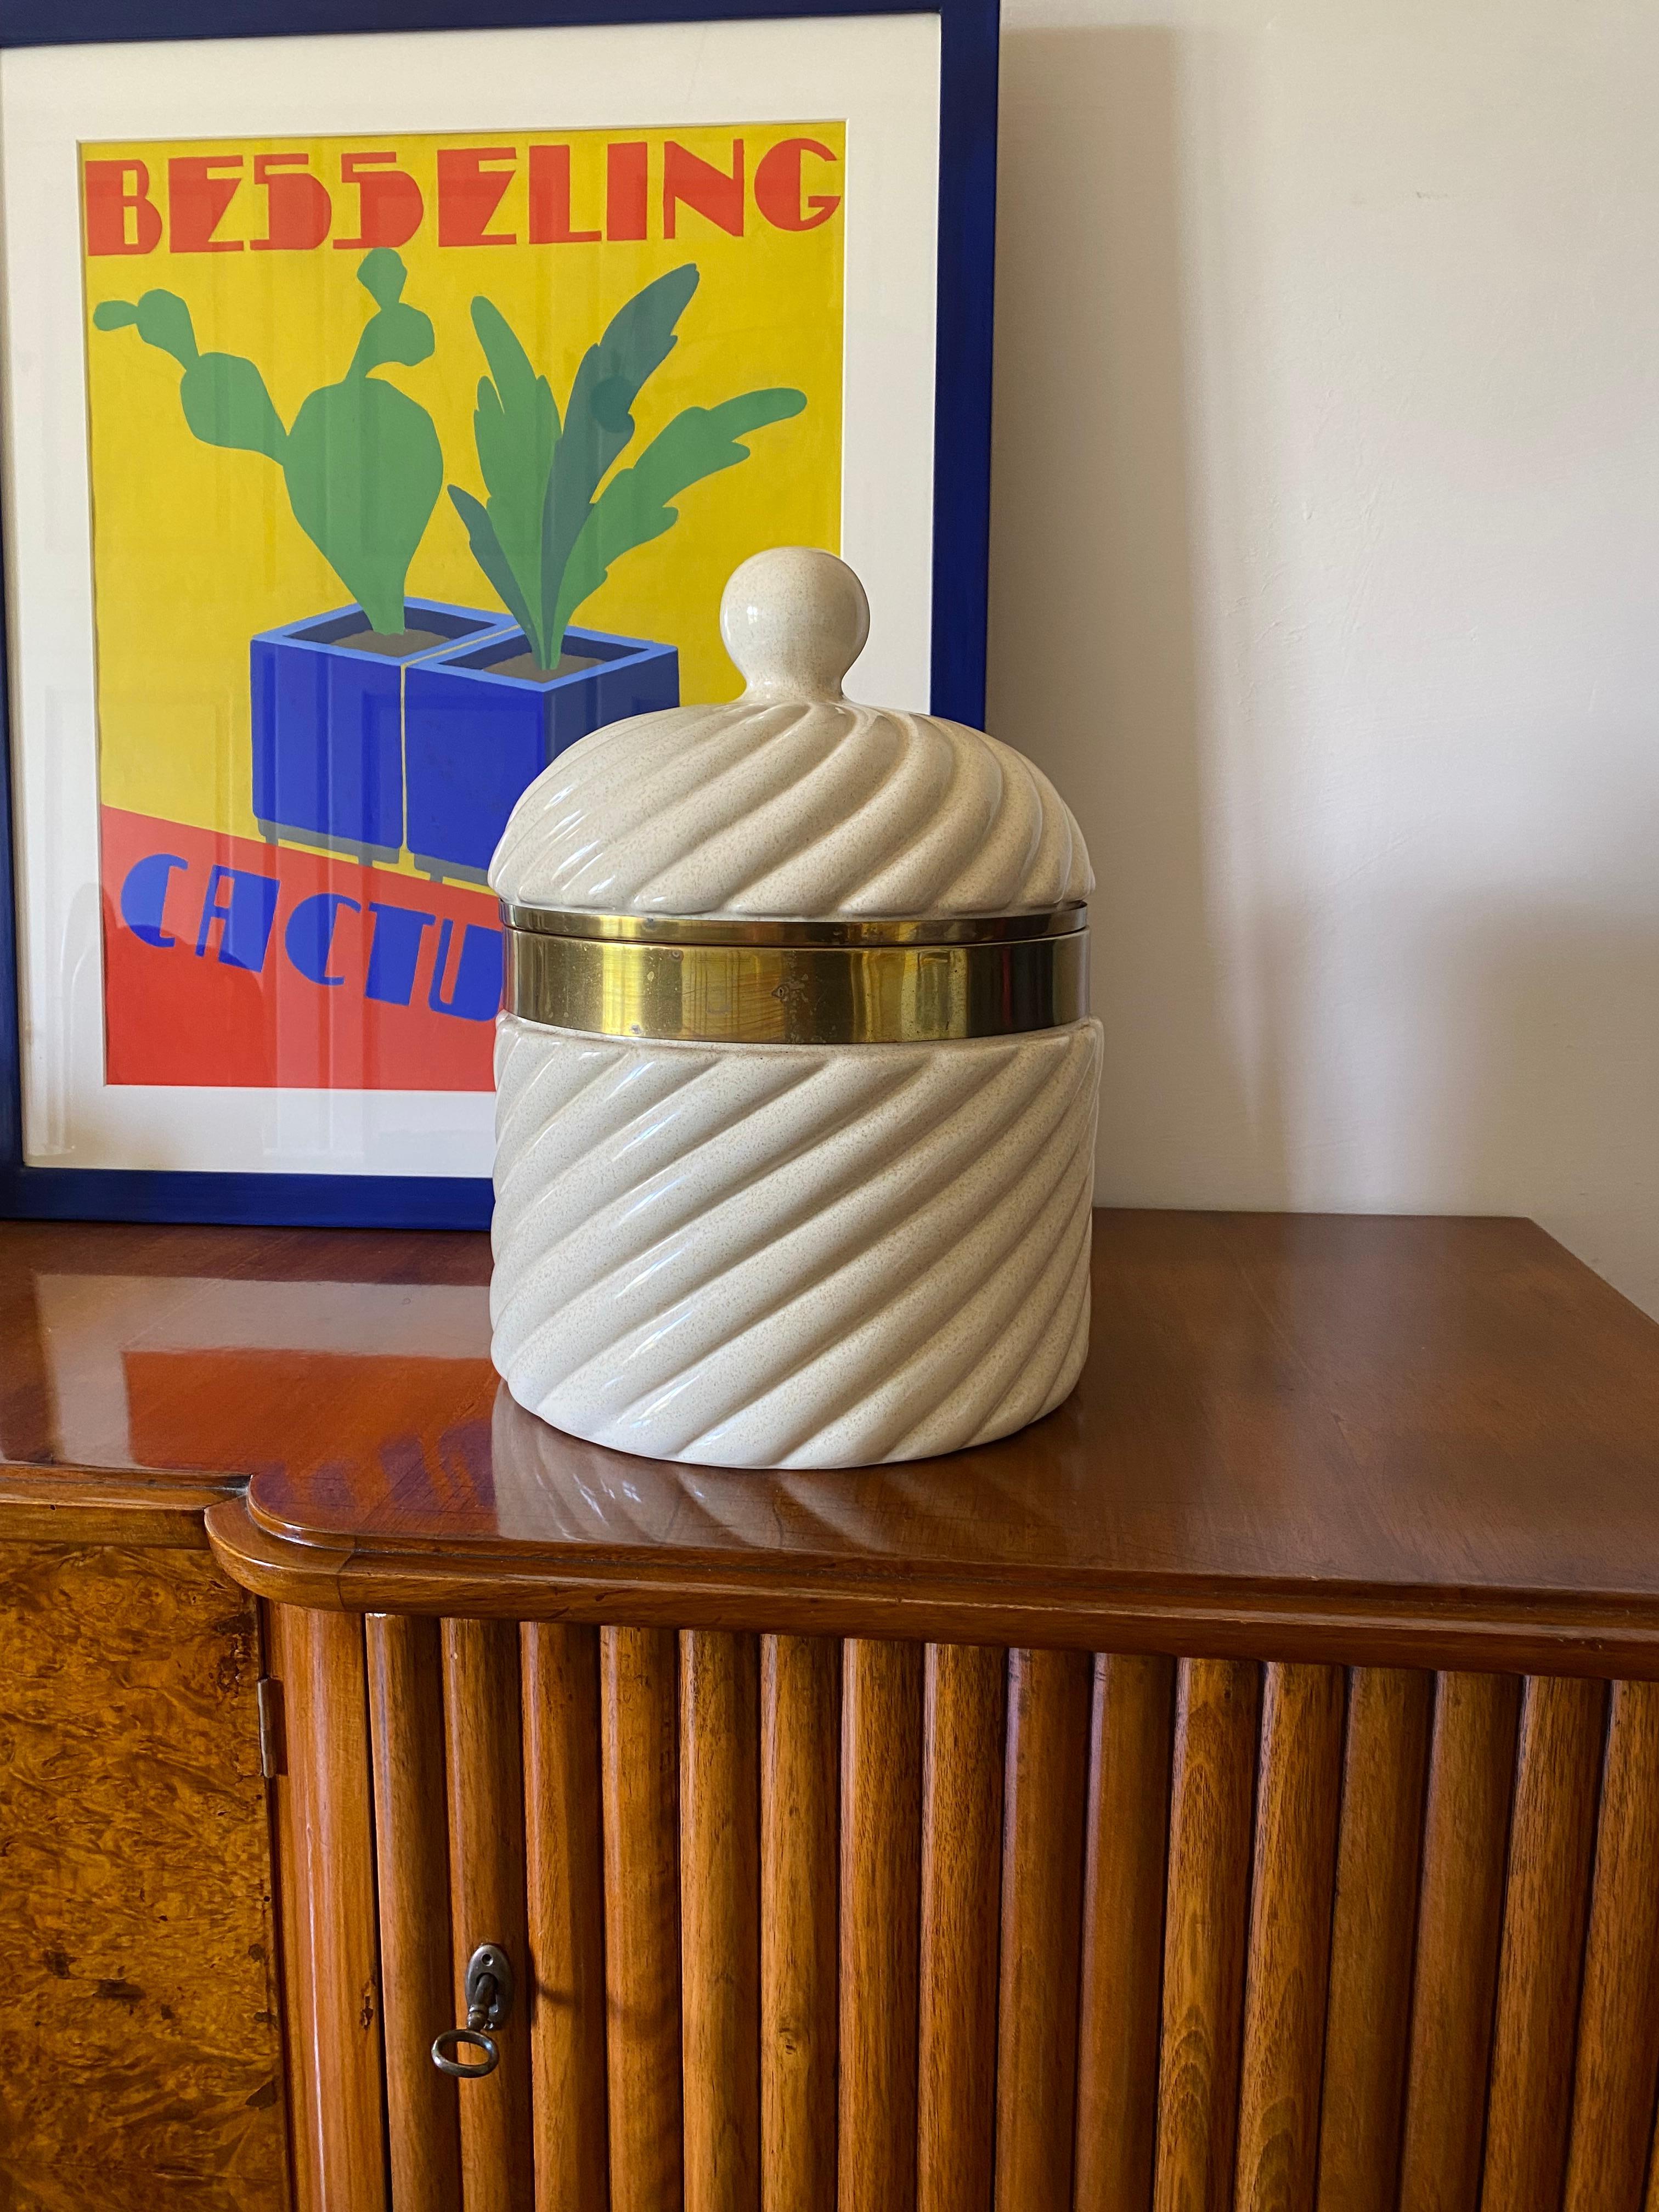 White Ice Bucket designed by Tommaso Barbi, 1970

produced by B Ceramiche

Brass, ceramic

37 x 26 x 26 cm

Signed and Marked on the bottom

Conditions: very good consistent with age and use, barely visible chip on one side, check the pictures